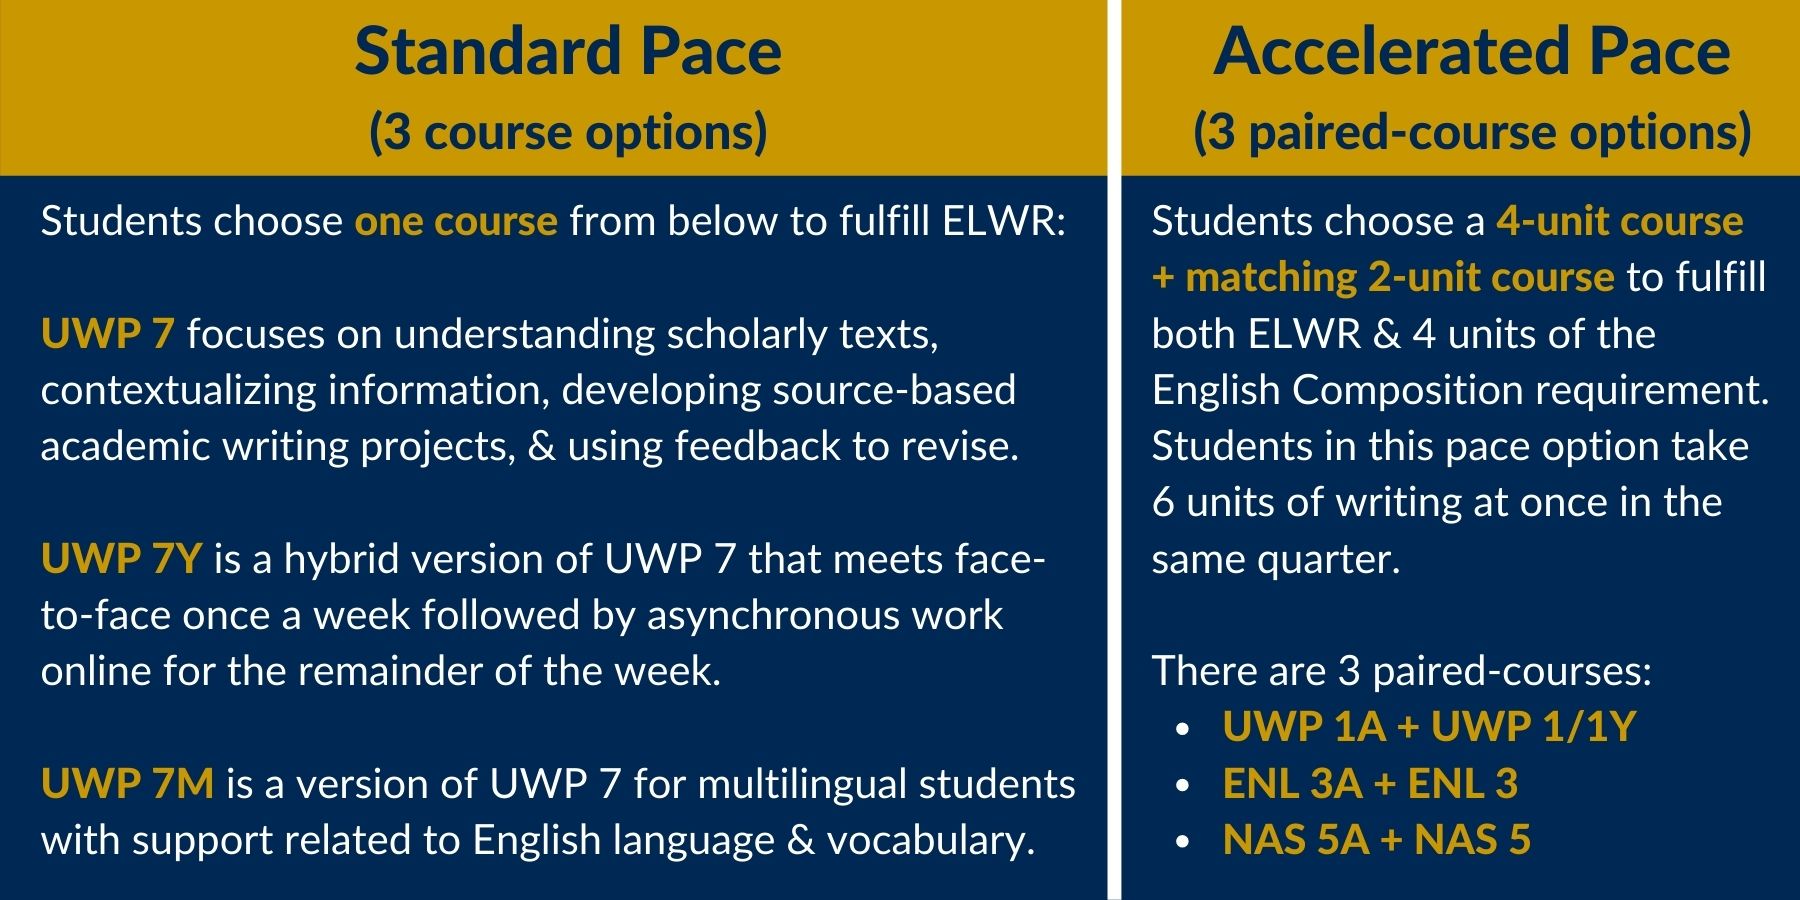 A chart with information about the different pace options (standard or accelerated) and their corresponding course options in the Entry Level Writing Pathway.